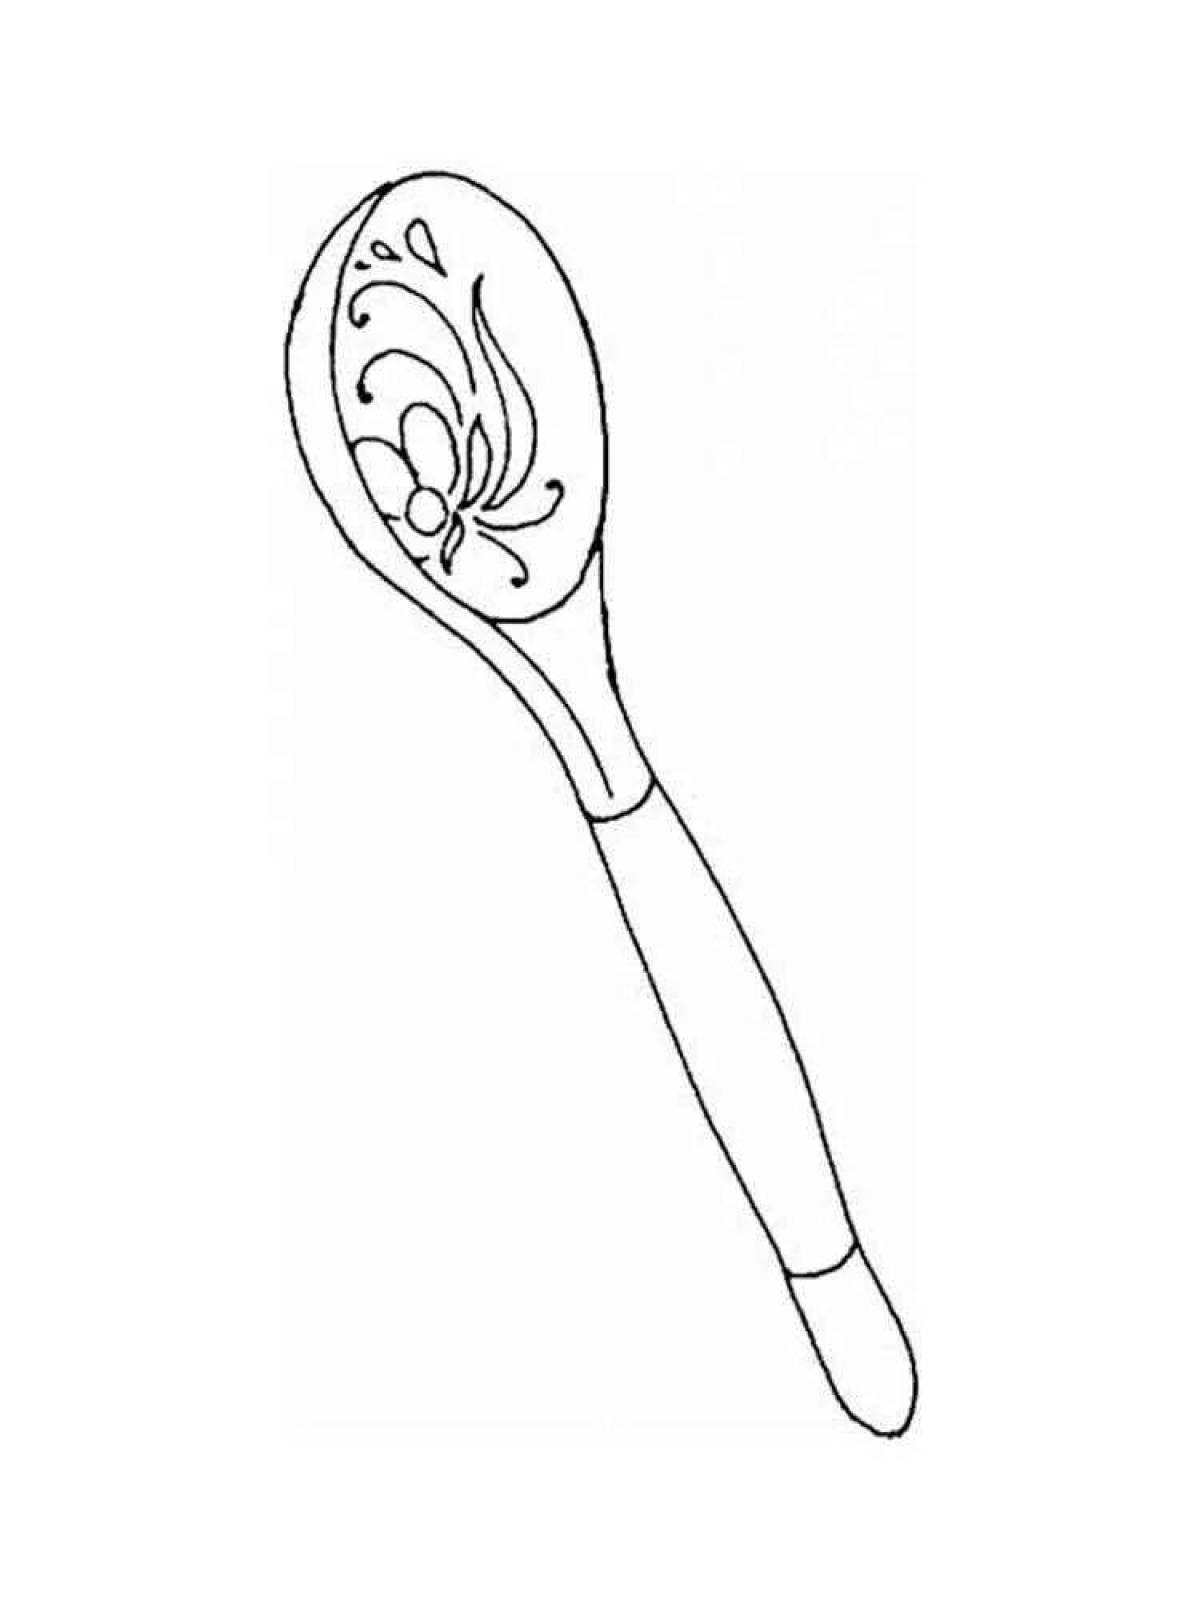 Coloring page unusual painted wooden spoon